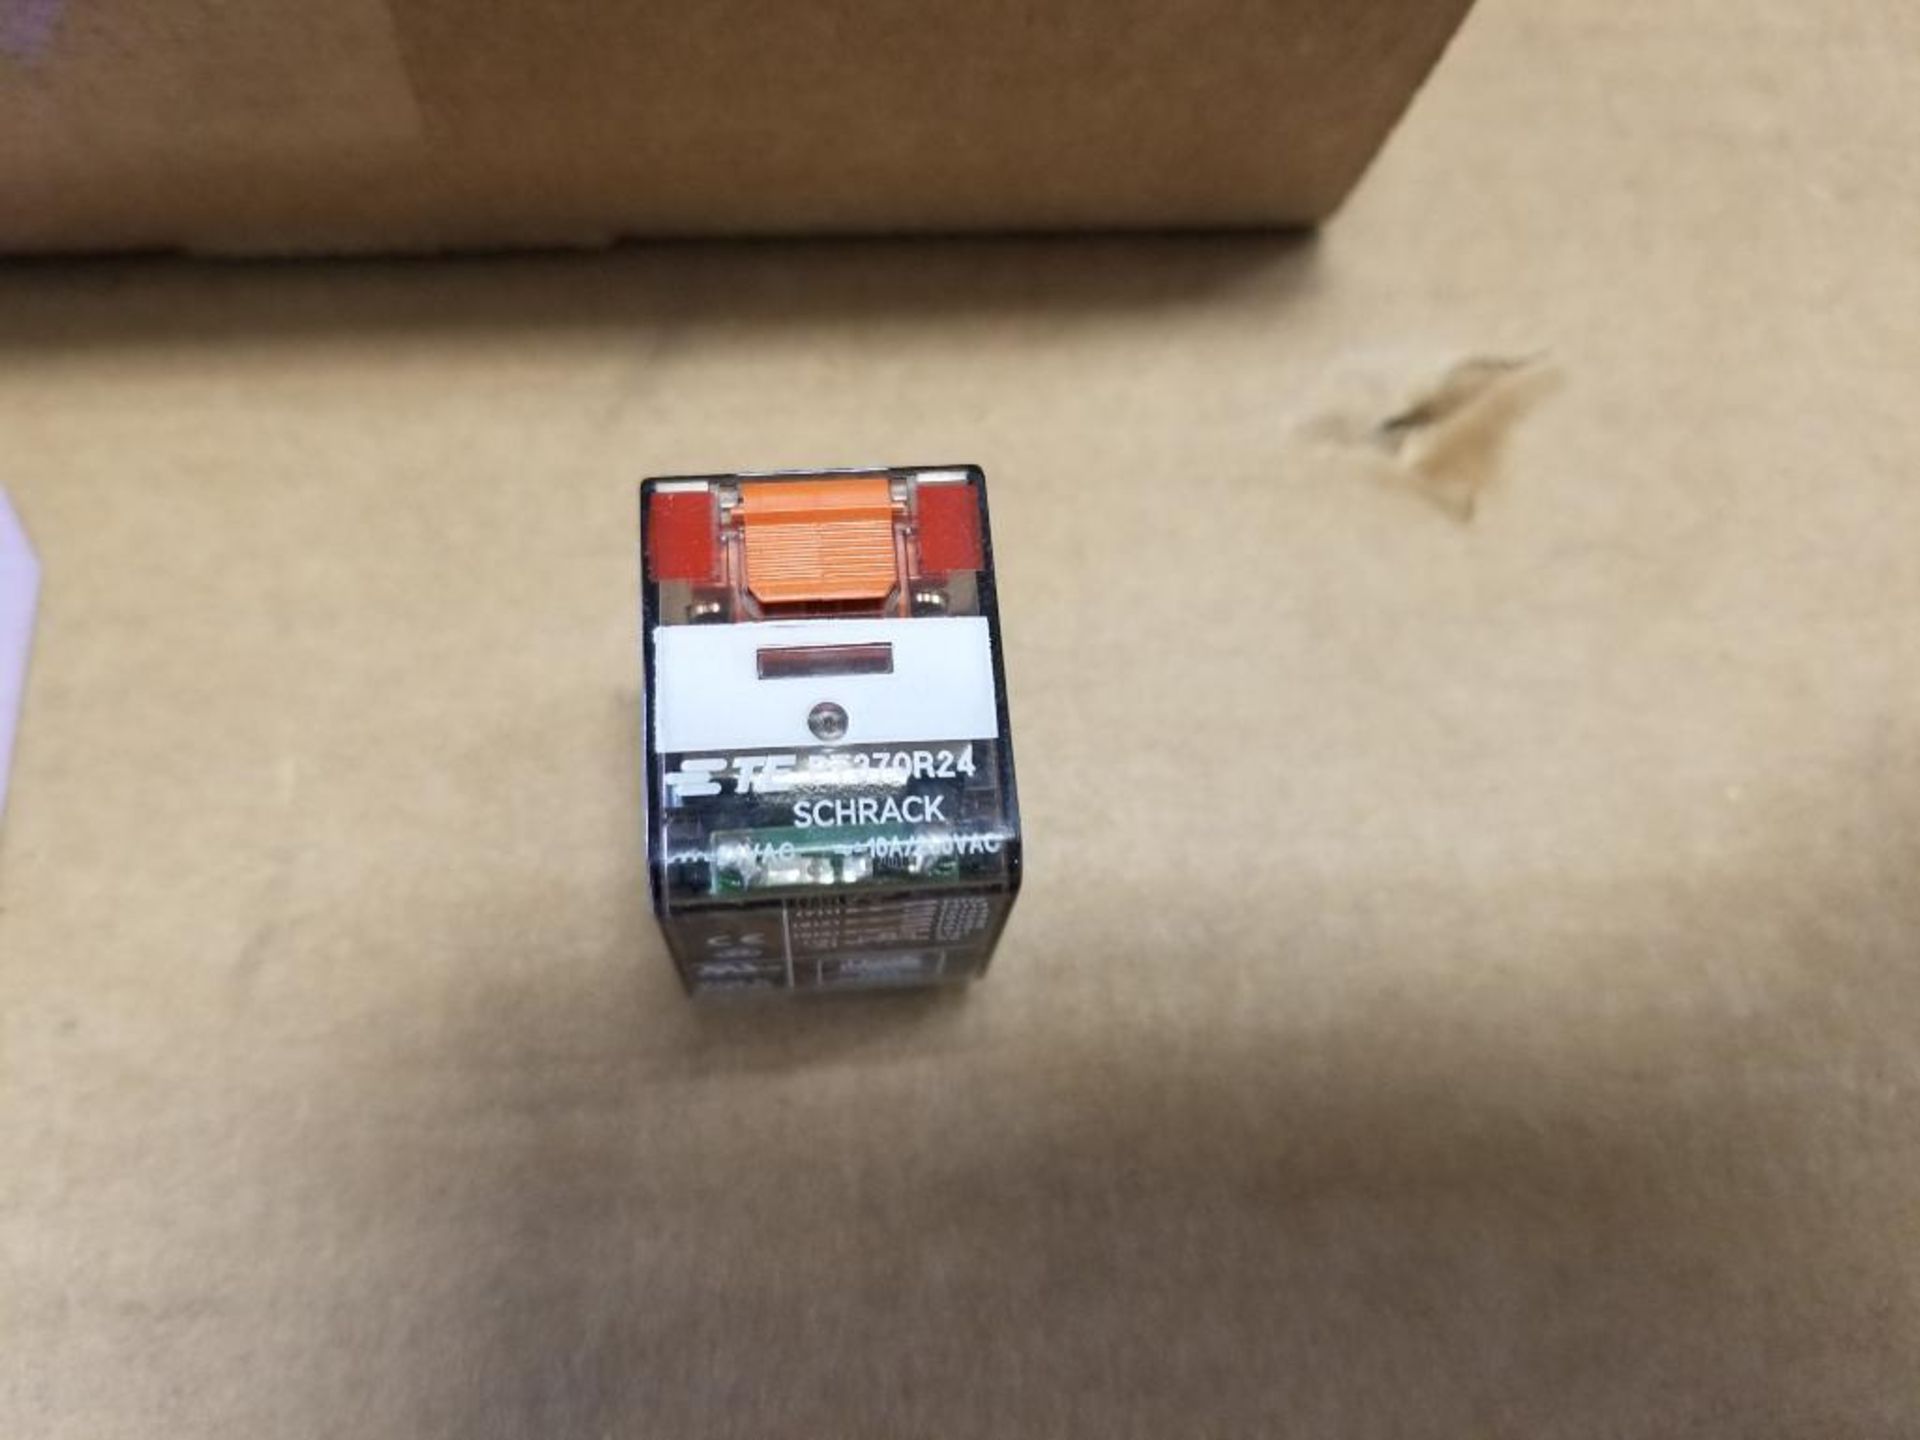 Qty 160 - TE Connectivity Schrack power relay. Part number PT370R24. New in bulk pack. - Image 4 of 5